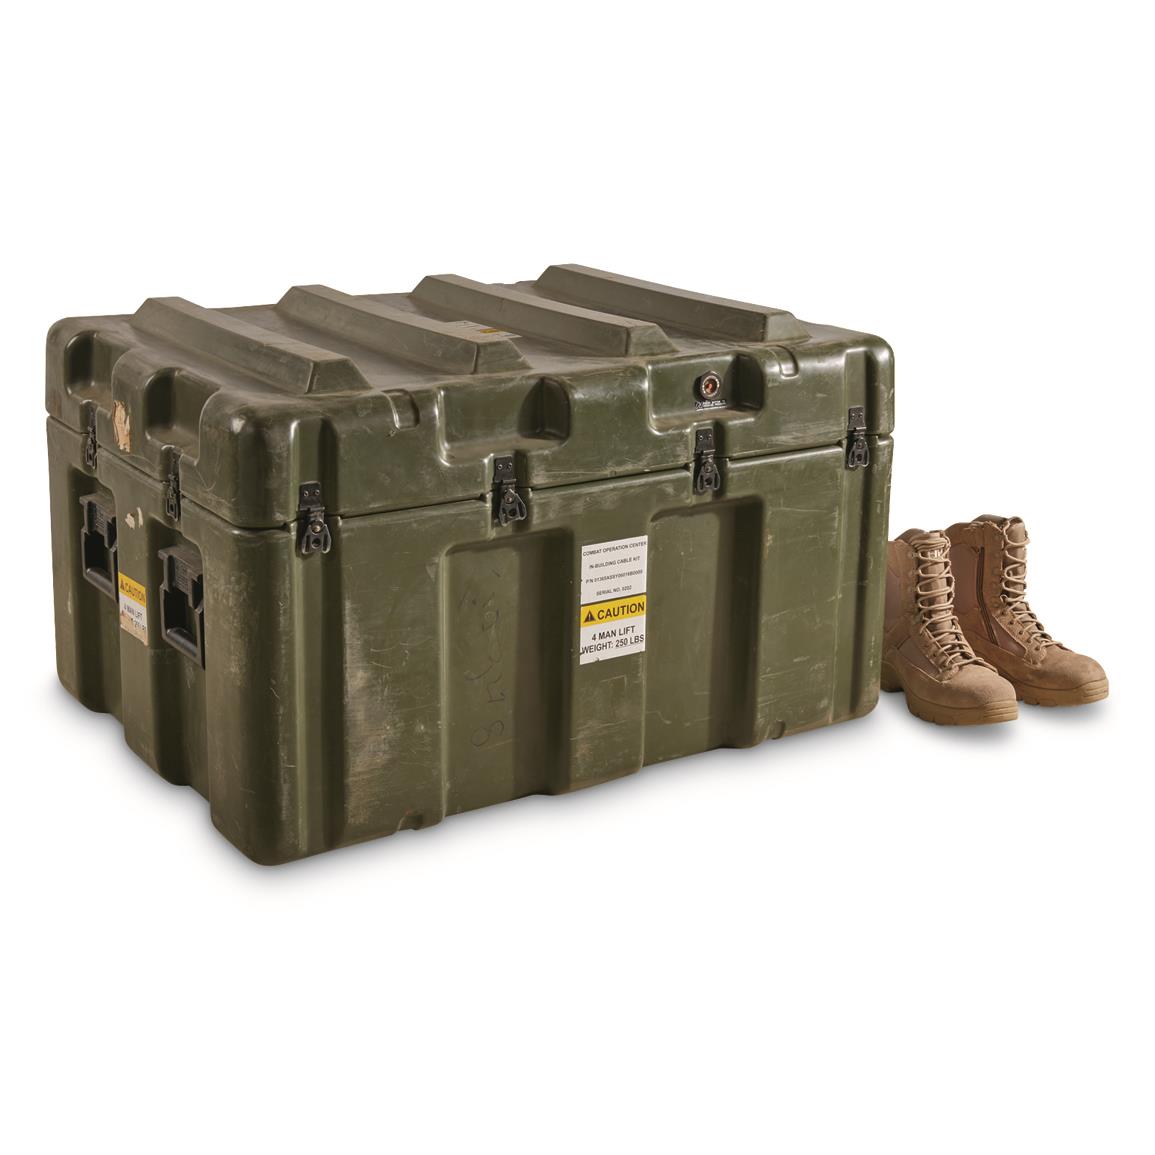 U.s. Military Surplus Hardigg Cargo Transport Case, Used - 676443, Storage Containers At ...